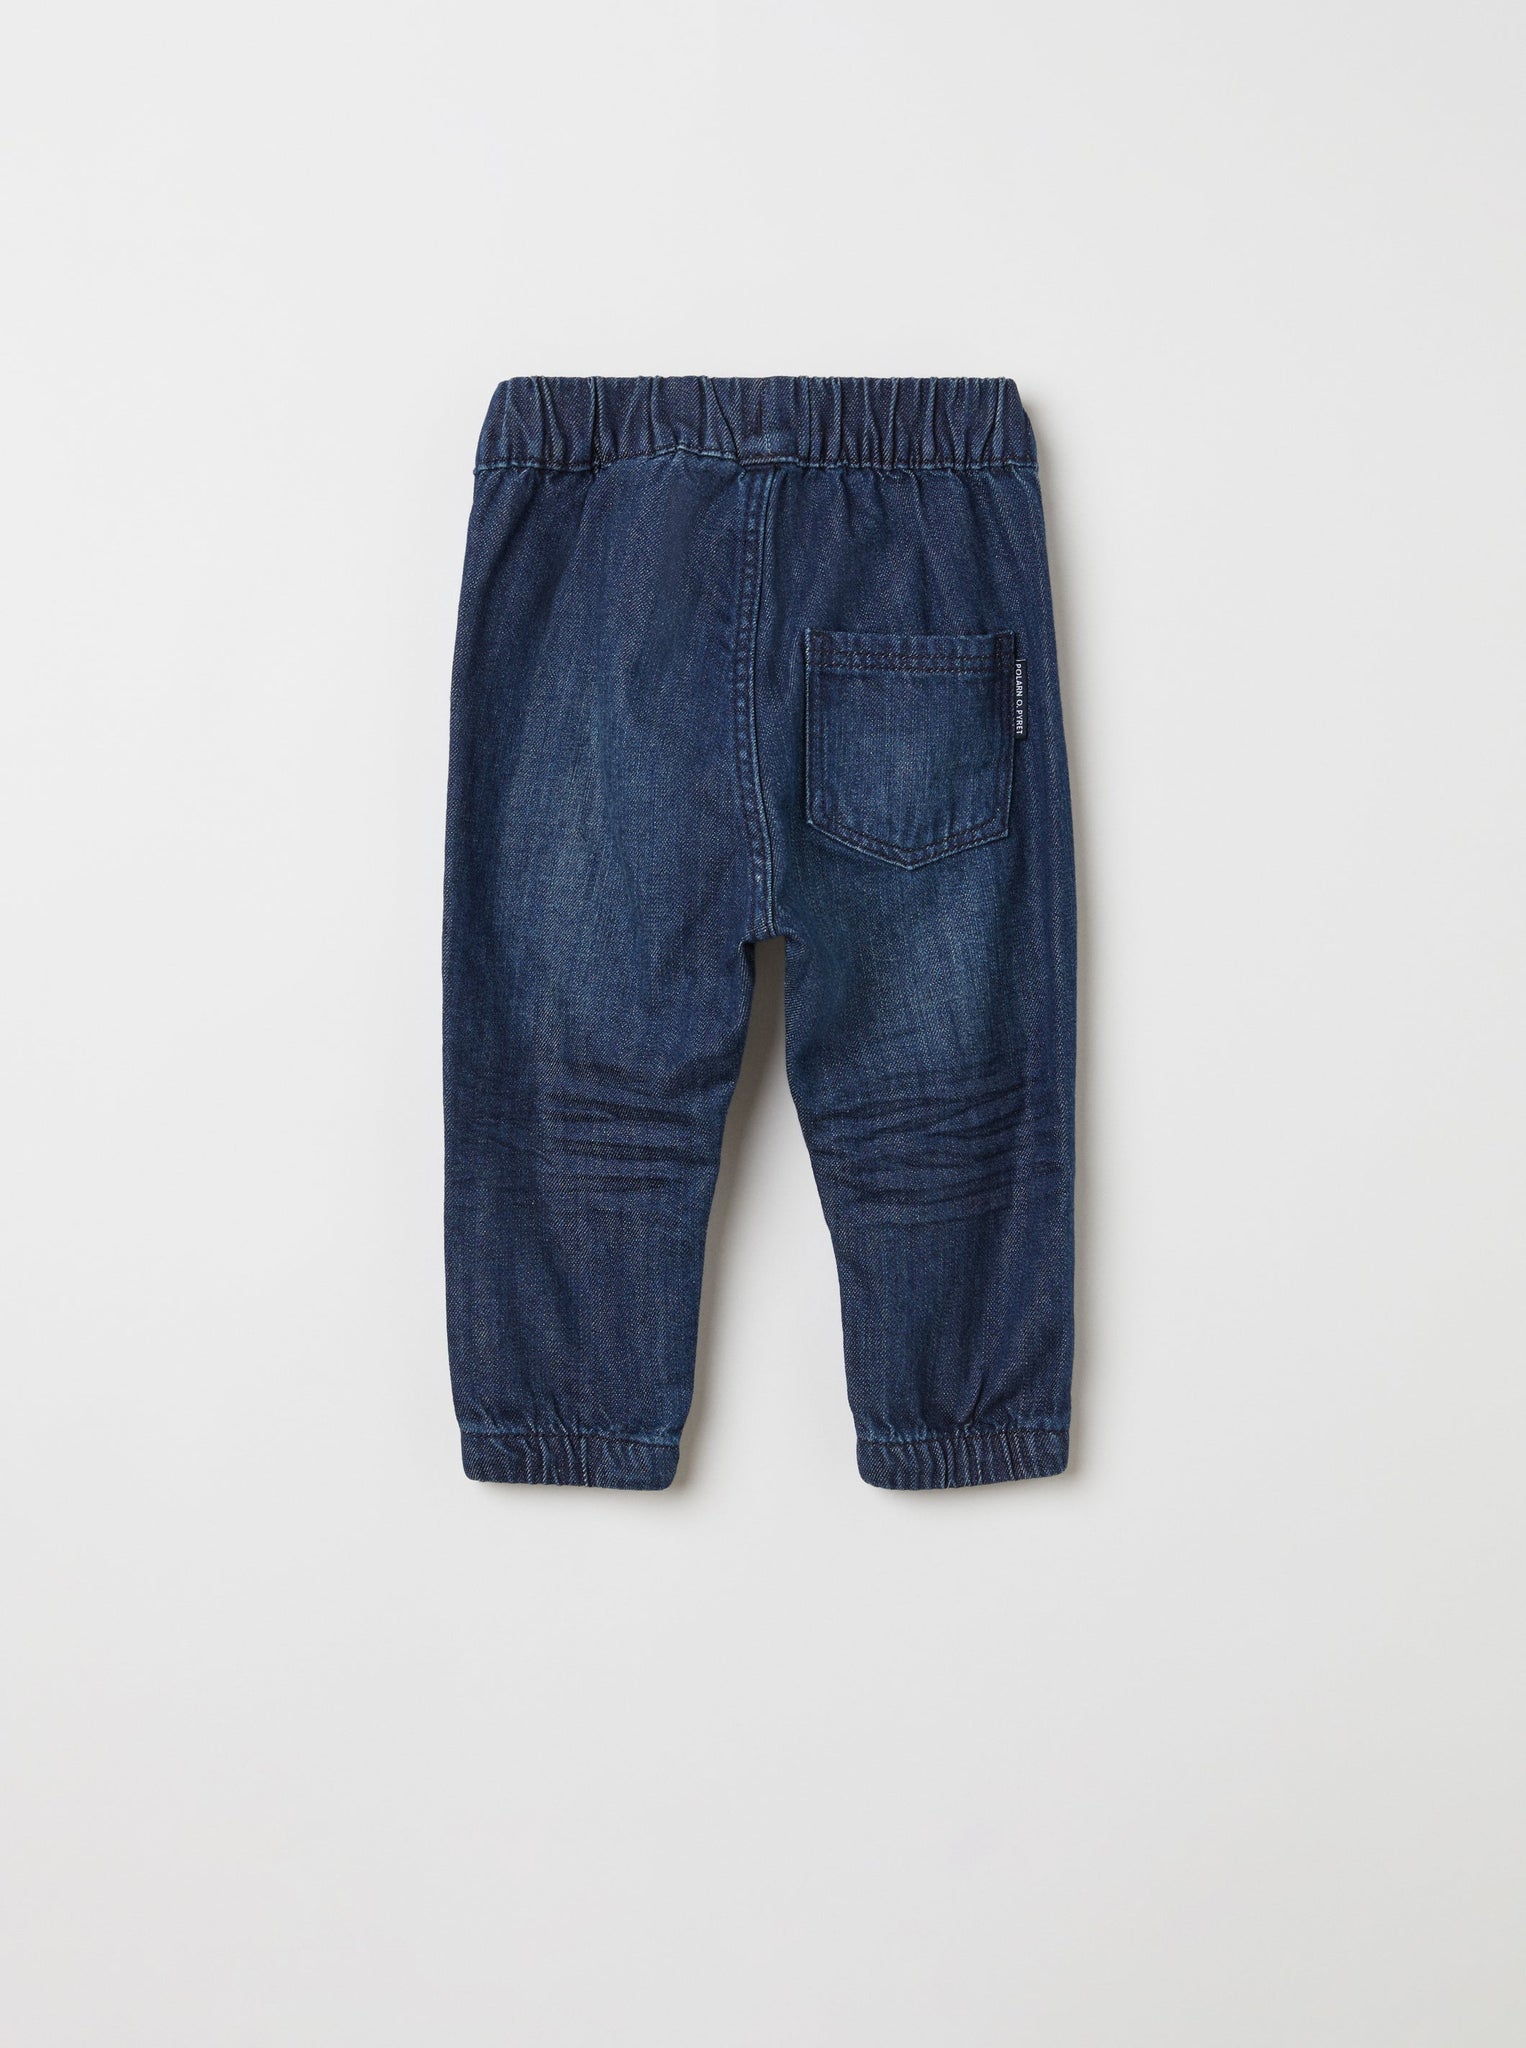 Cotton Pull-On Kids Jogger Jeans from the Polarn O. Pyret kidswear collection. Clothes made using sustainably sourced materials.